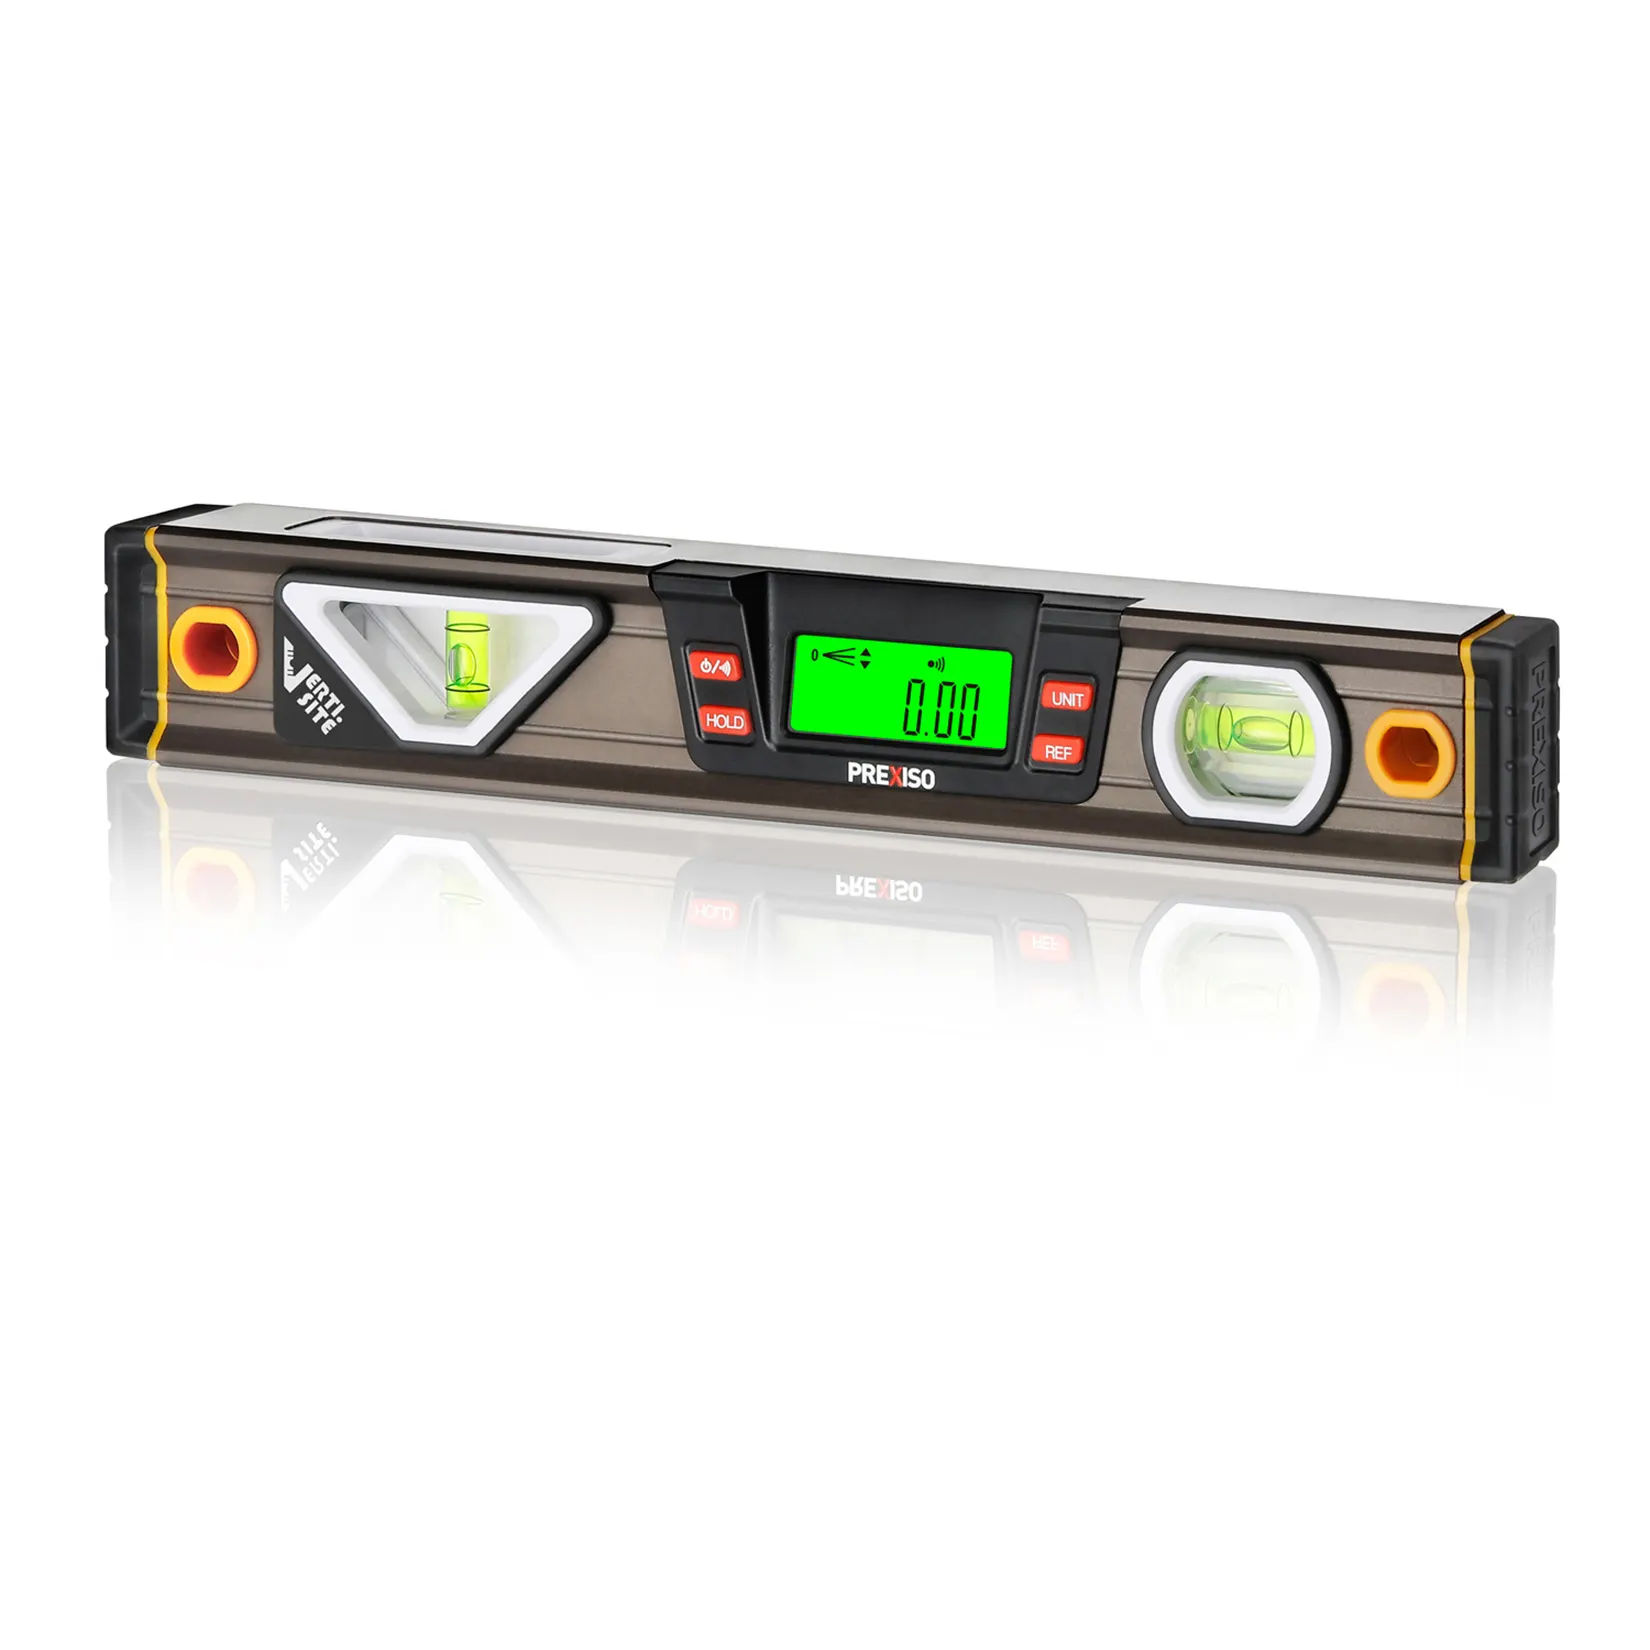 PREXISO 11.5 in industrial Digital Spirit Level angle slope digital level with LCD Display and 2 Bubbles